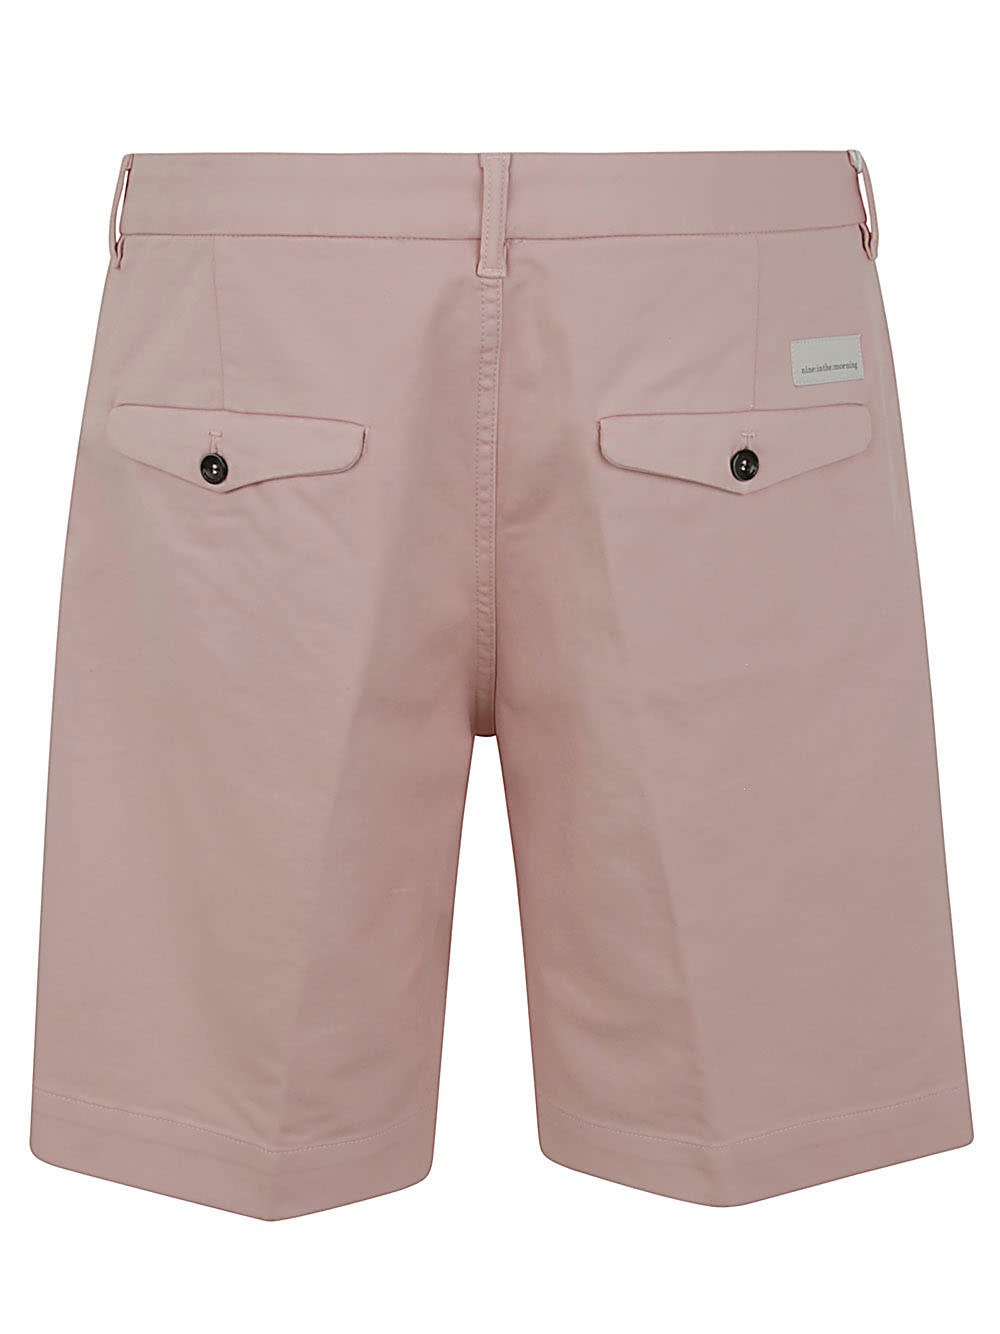 Shop Nine In The Morning Ermes Bermuda Chino In Pink